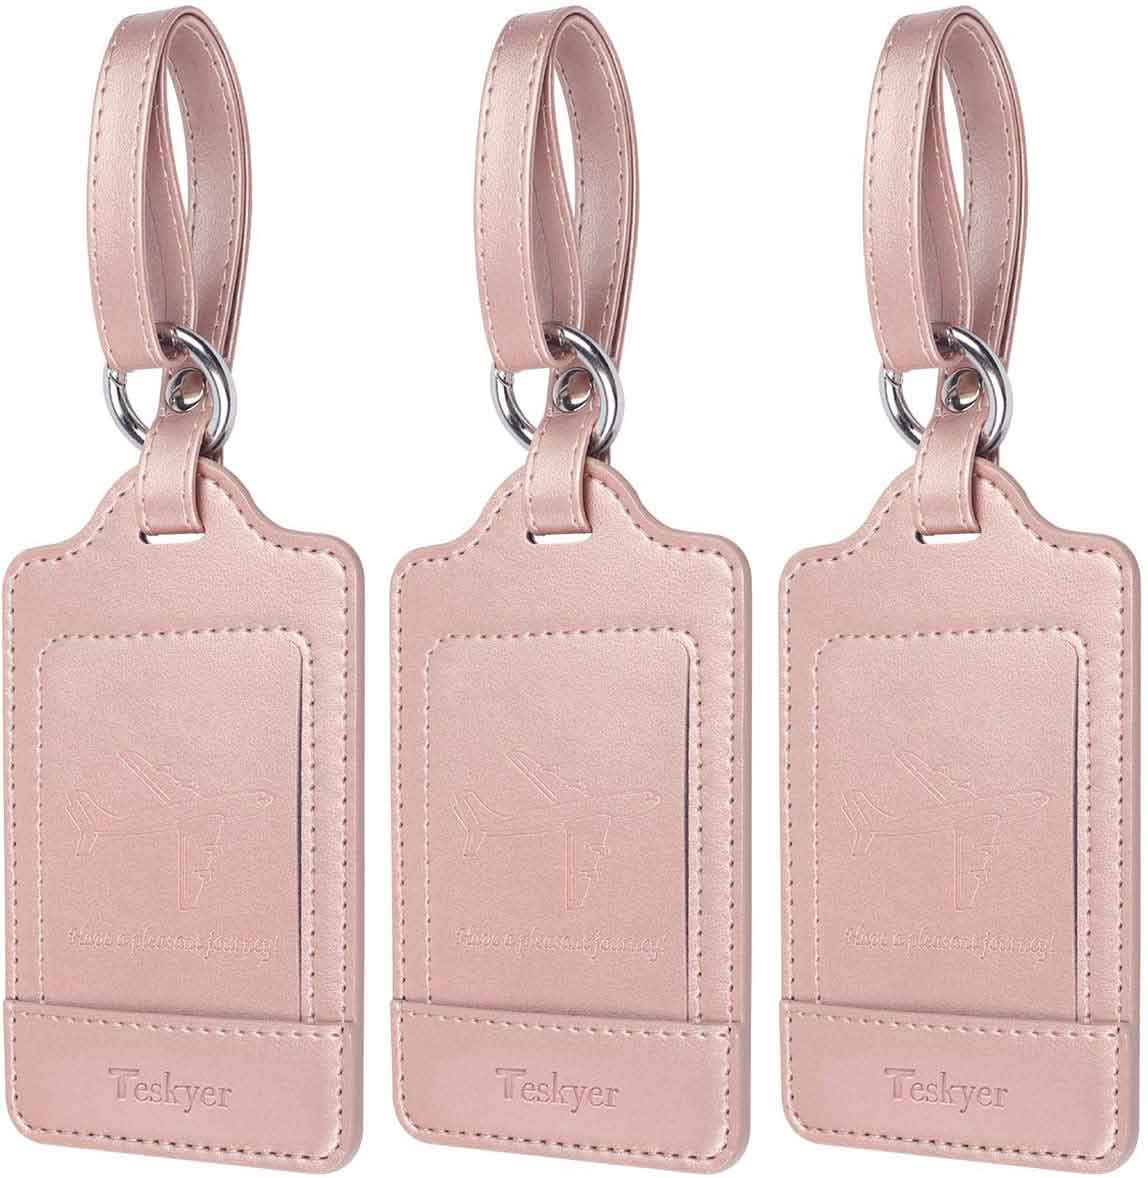  Arae Luggage Tags Travel Accessories for Suitcase Handbags  Backpacks, PU Leather Luggage Tag with ID Label and Full Privacy Protection  - 2 Packs, Rose Gold : Clothing, Shoes & Jewelry